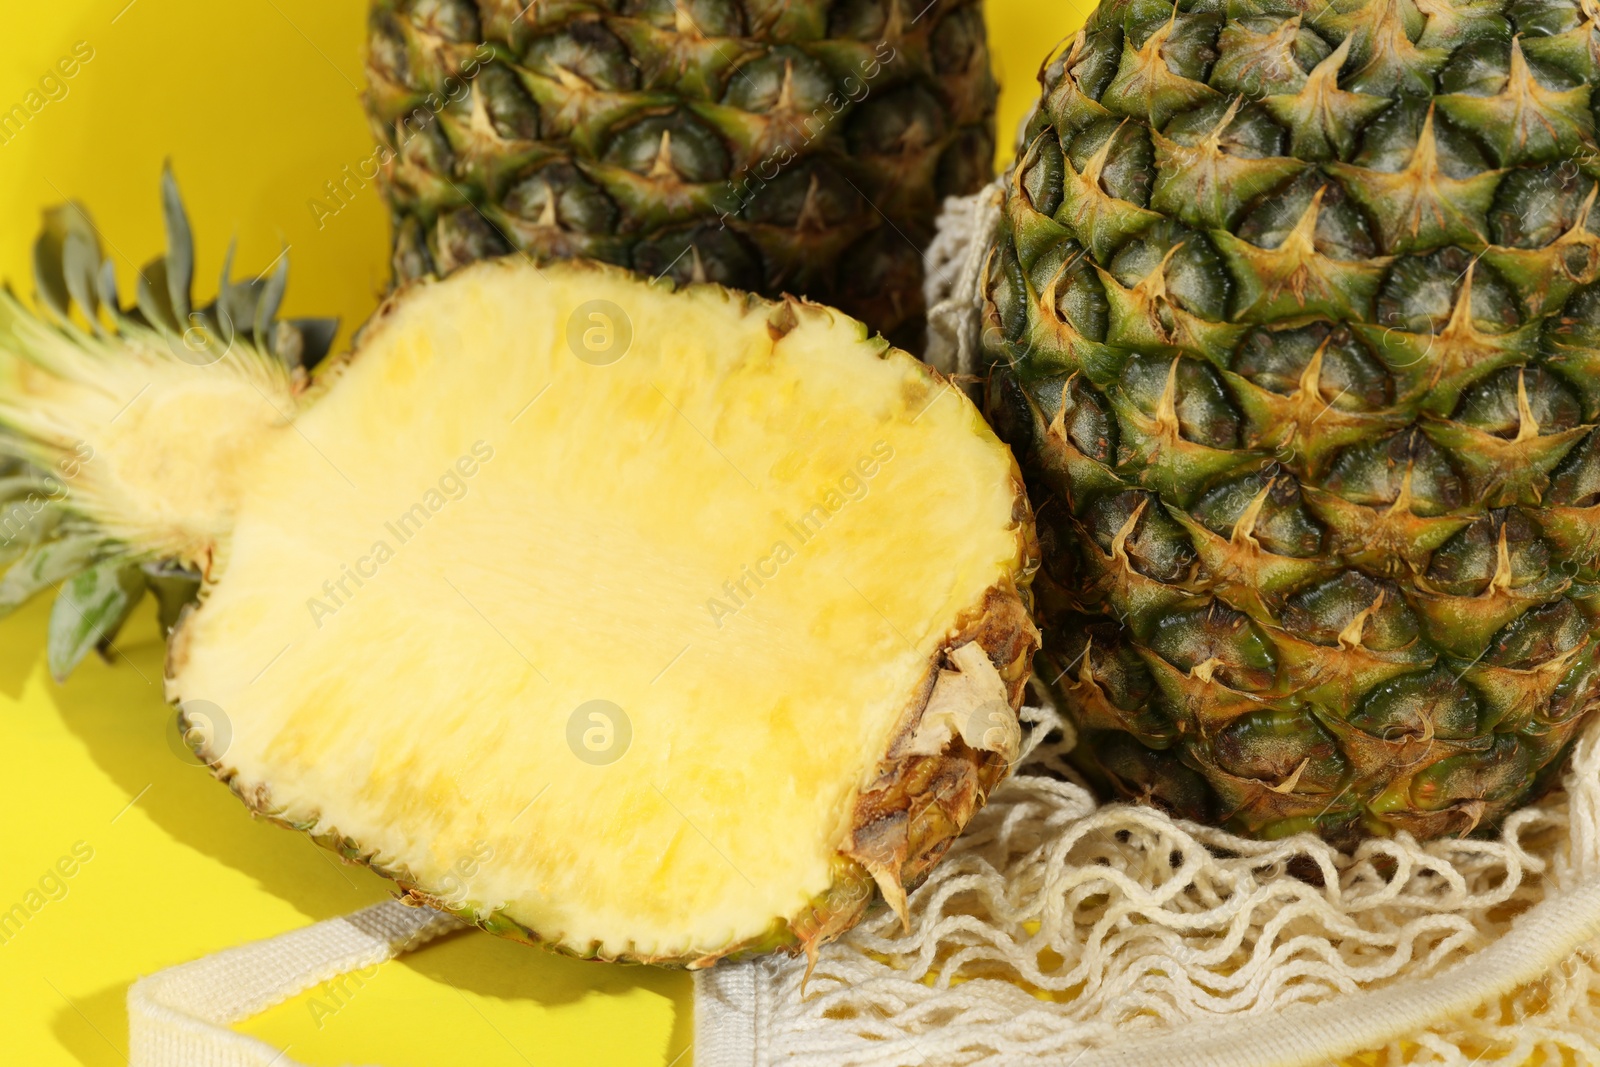 Photo of Whole and cut ripe pineapples on yellow background, closeup